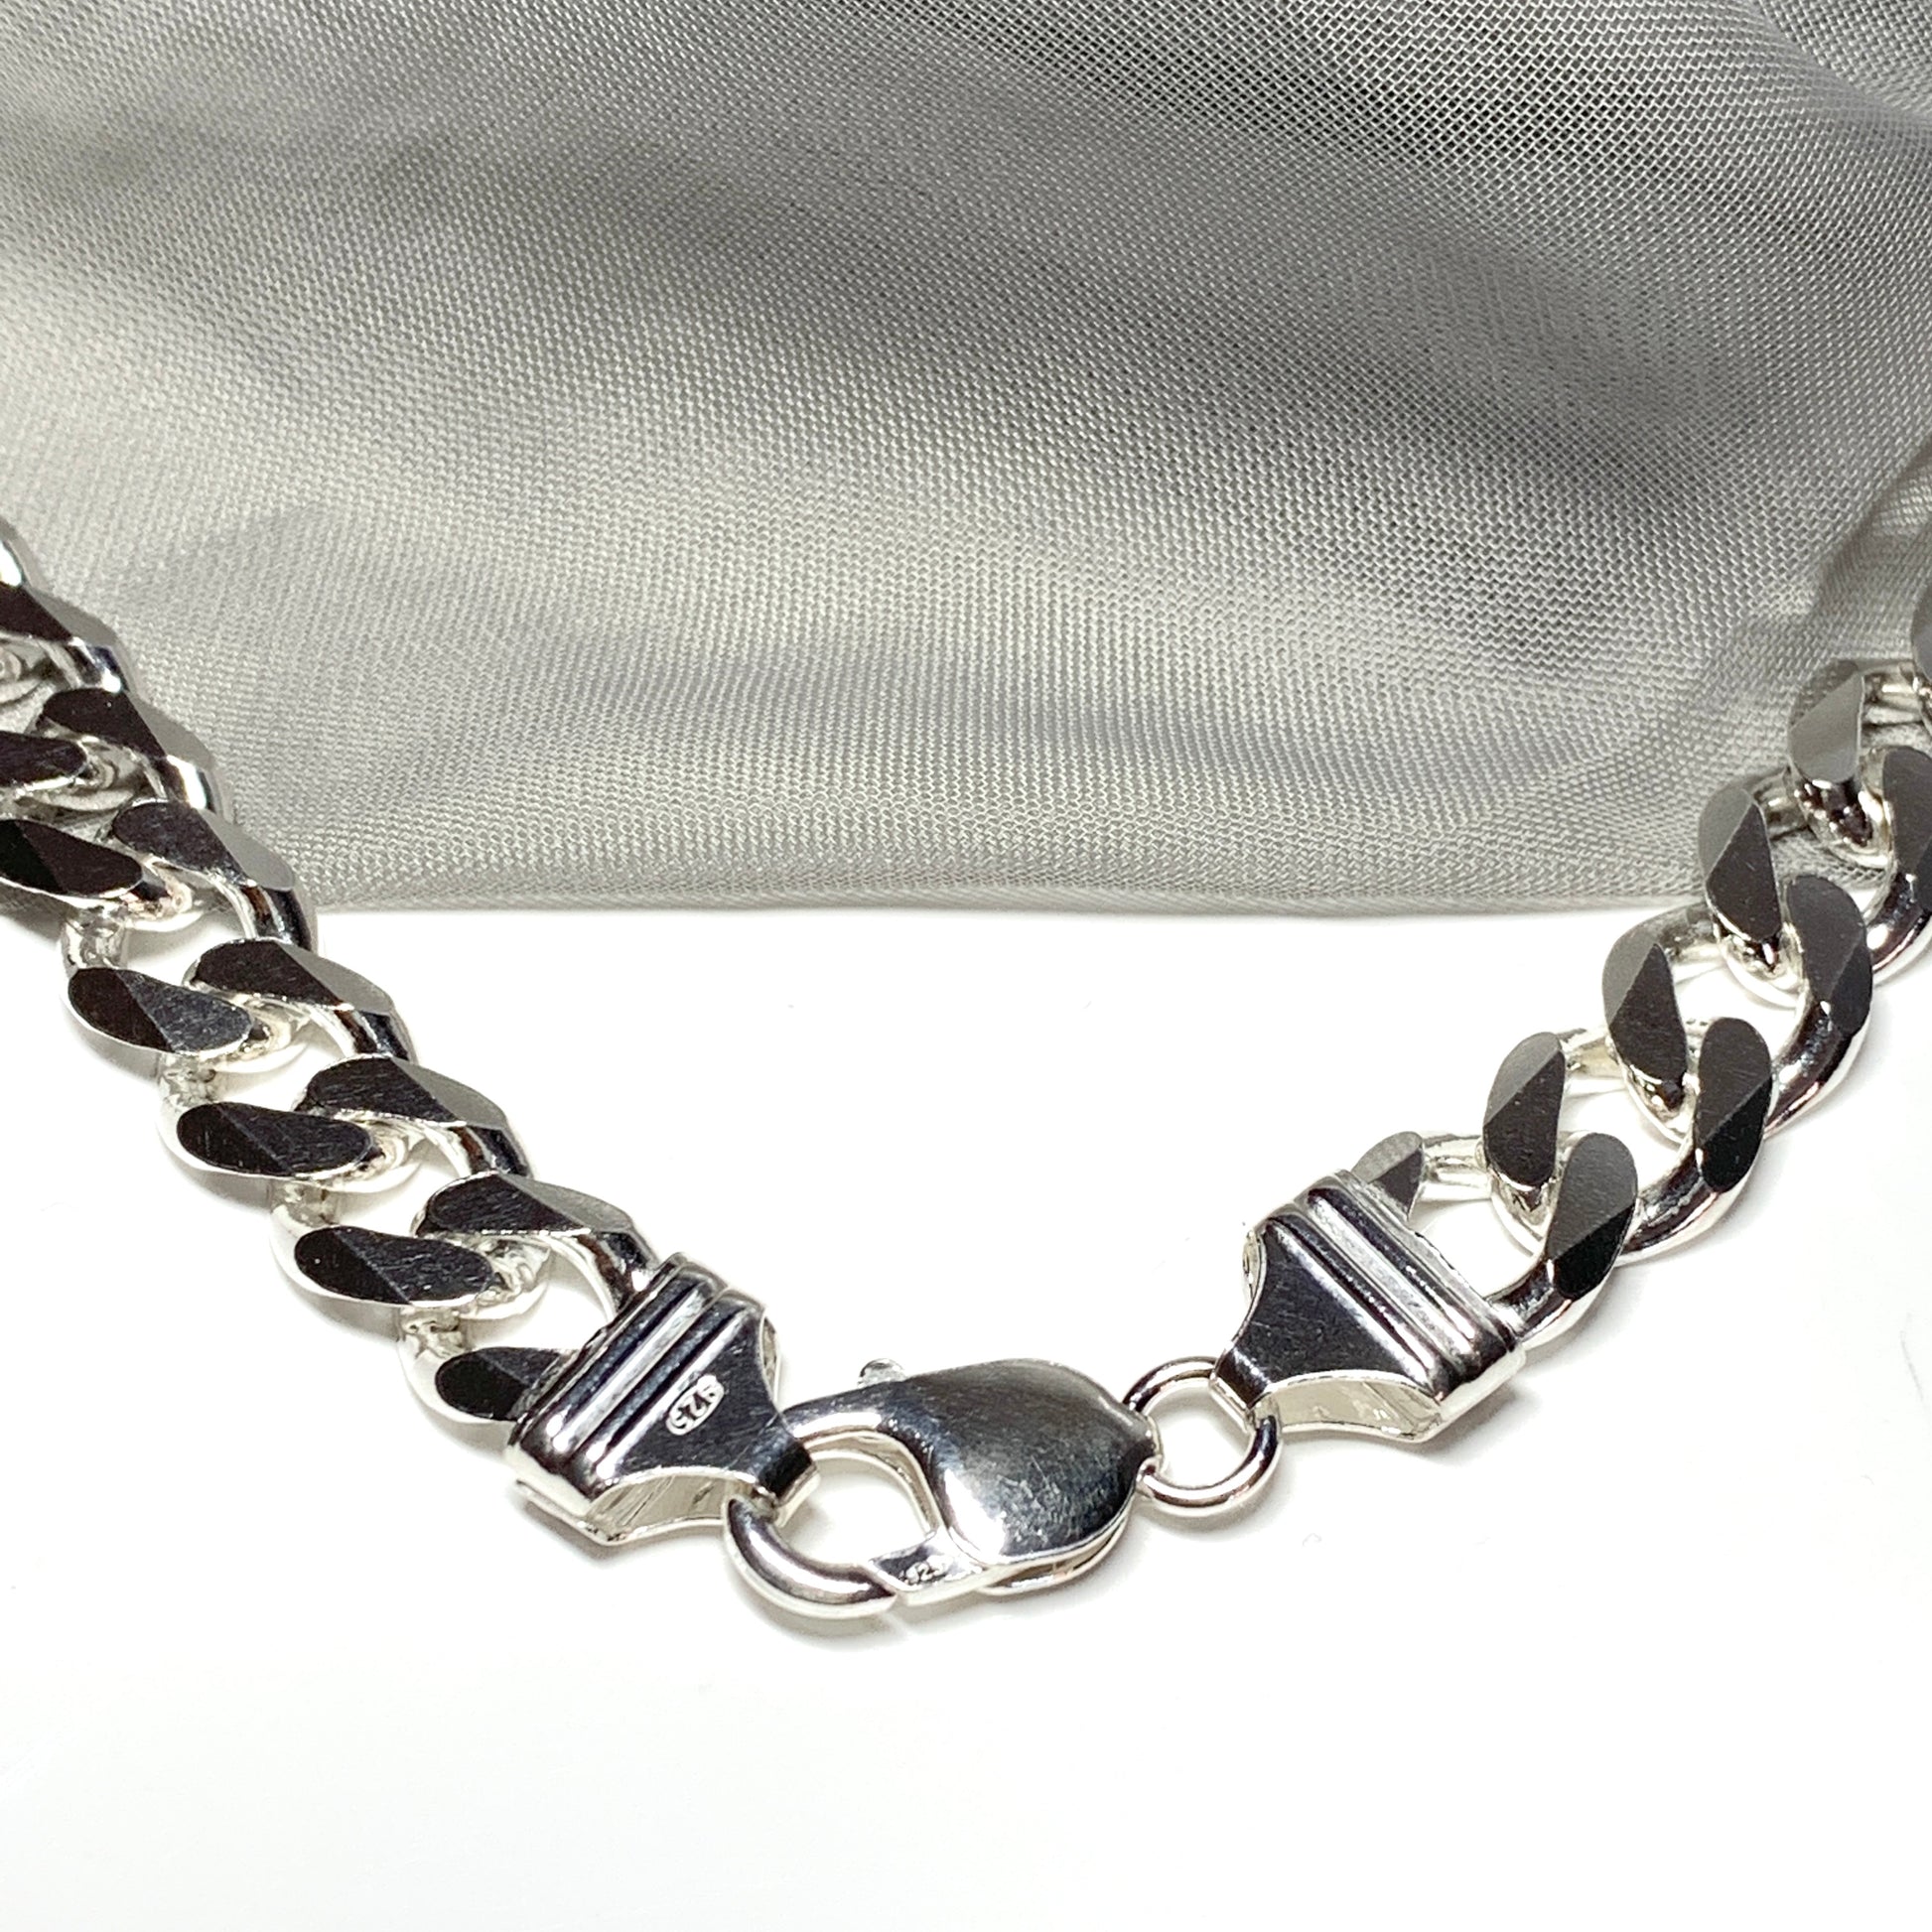 Men's solid 100g sterling silver extra heavyweight 20 inch curb necklace